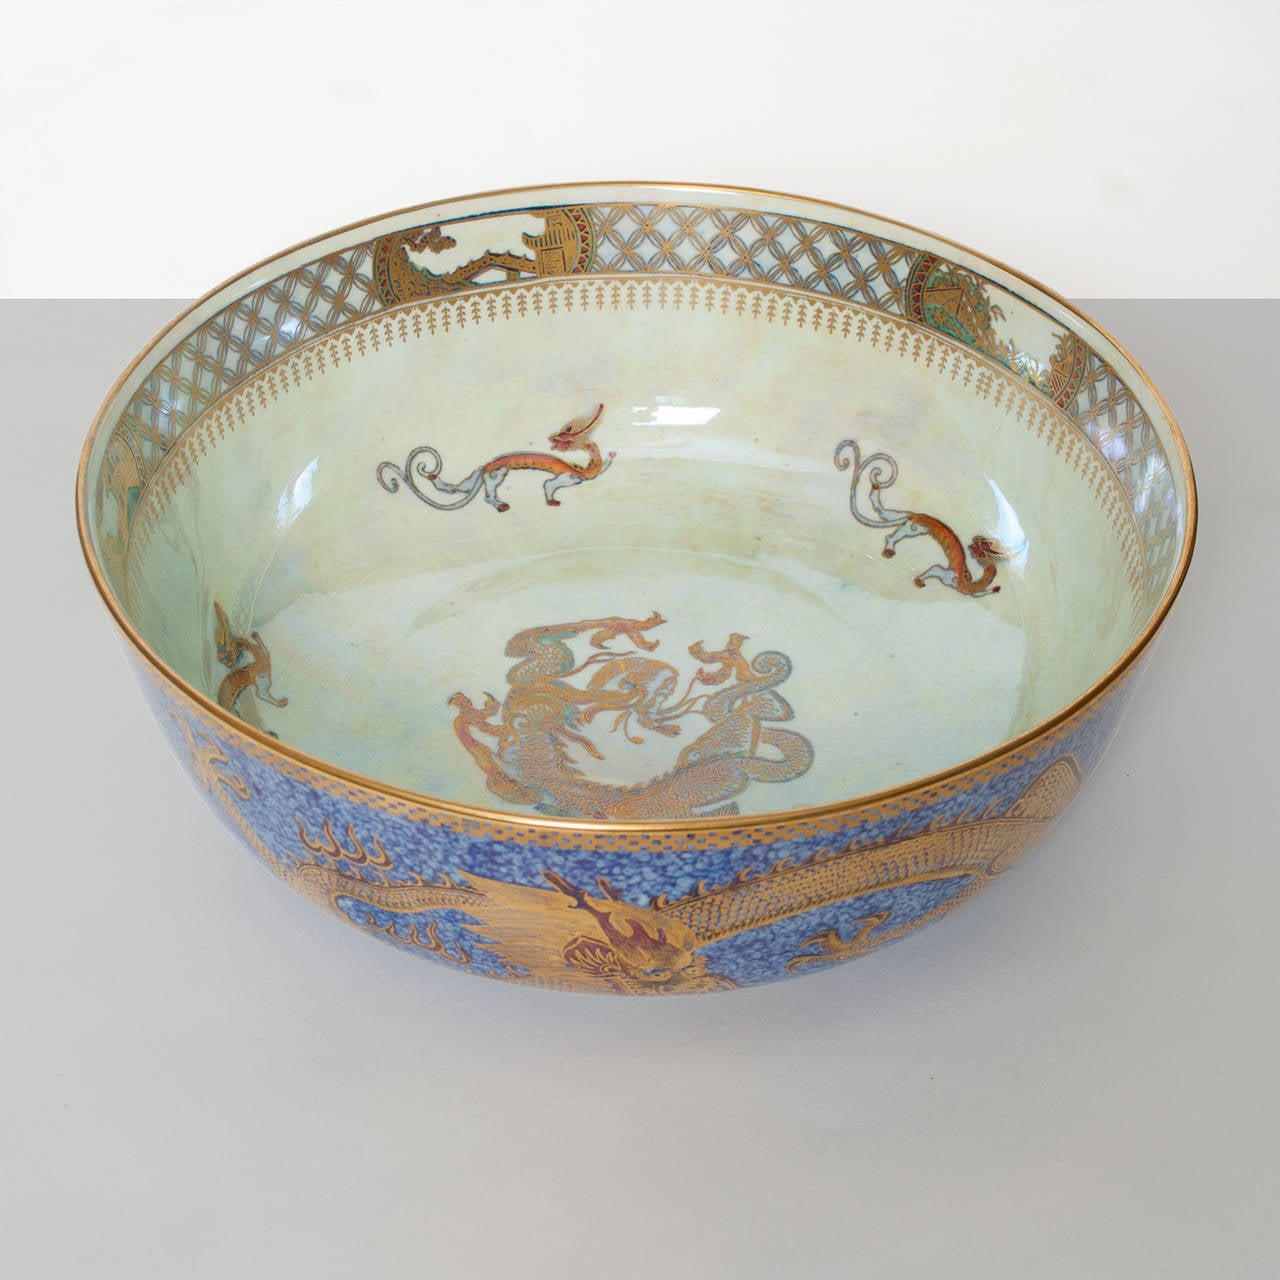 A large and very finely decorated Wedgwood Fairyland Lustre bowl designed by Daisy Makeig-Jones. The bowl's mottled blue exterior is decorated with three gilded celestial dragons and a gold dragon at the inside center along with 3 smaller dragons.